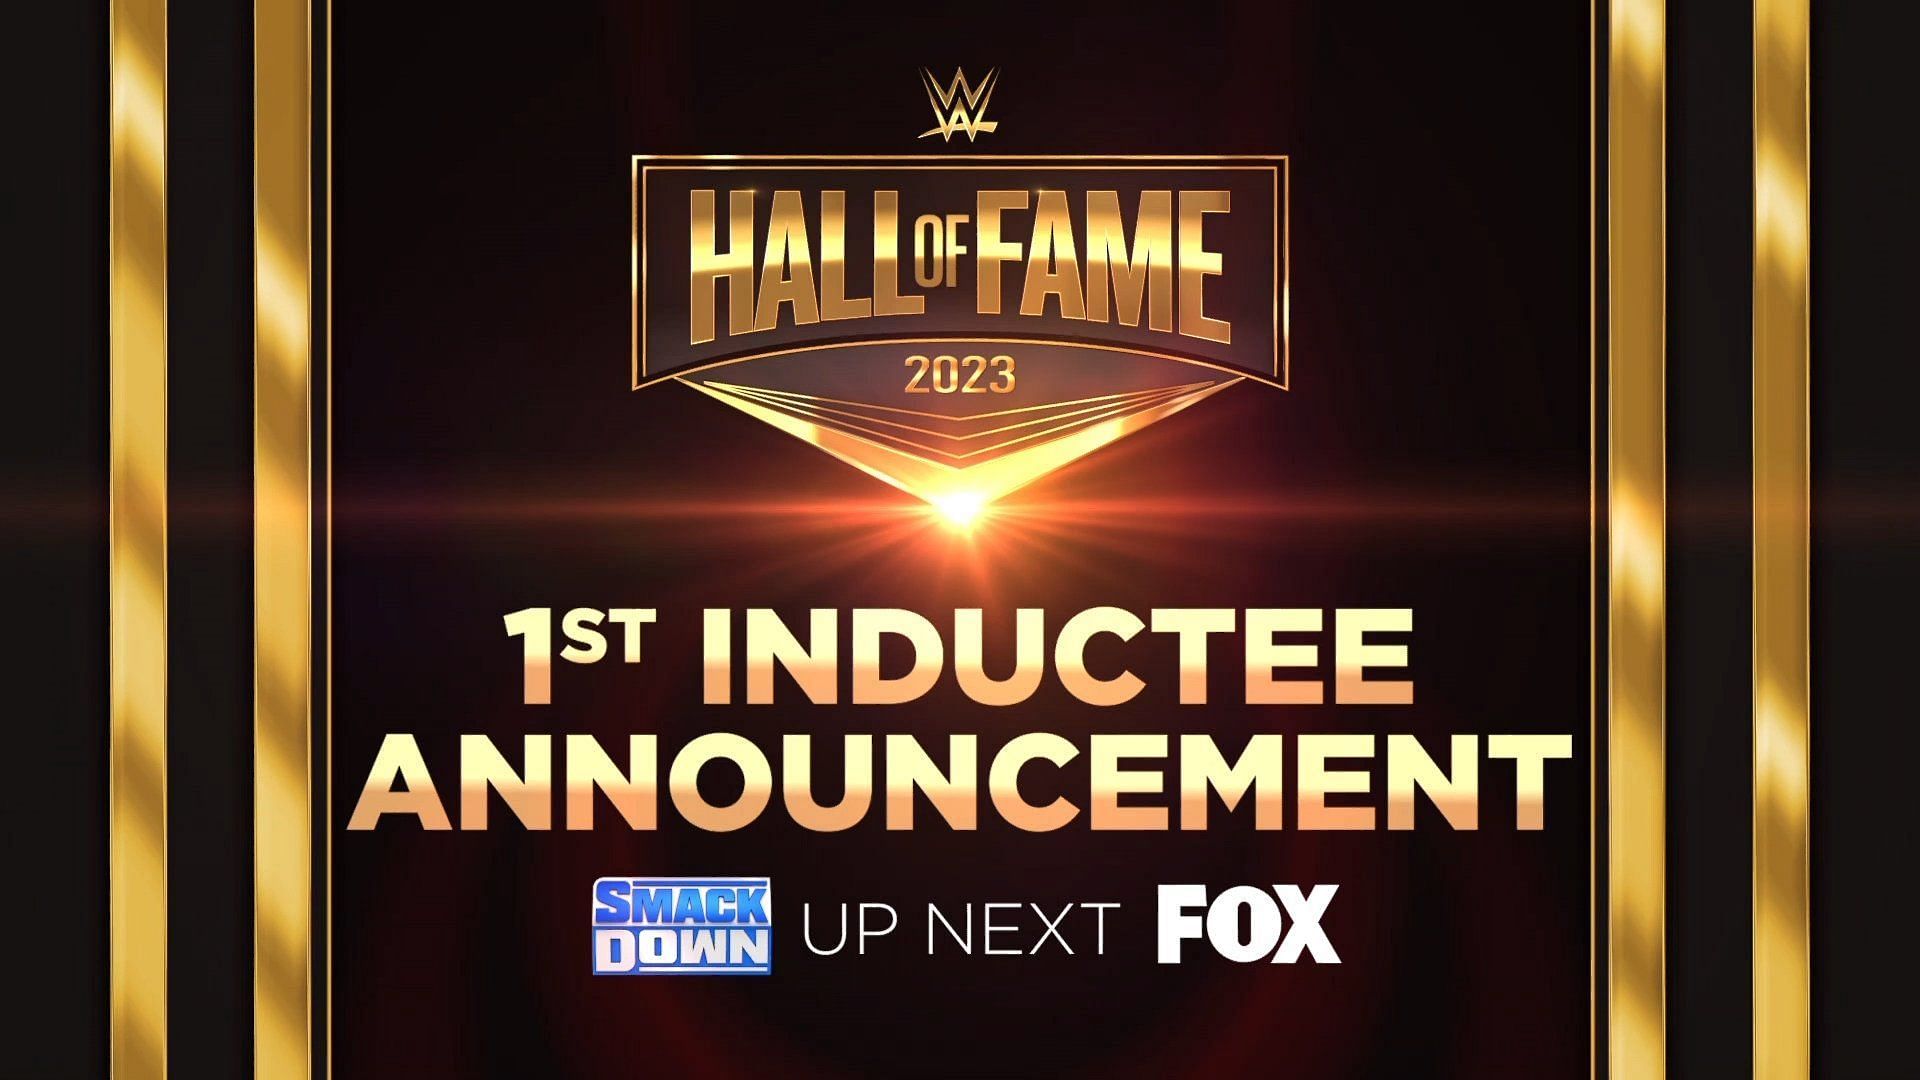 WWE announces first inductee into the 2023 Hall of Fame on SmackDown